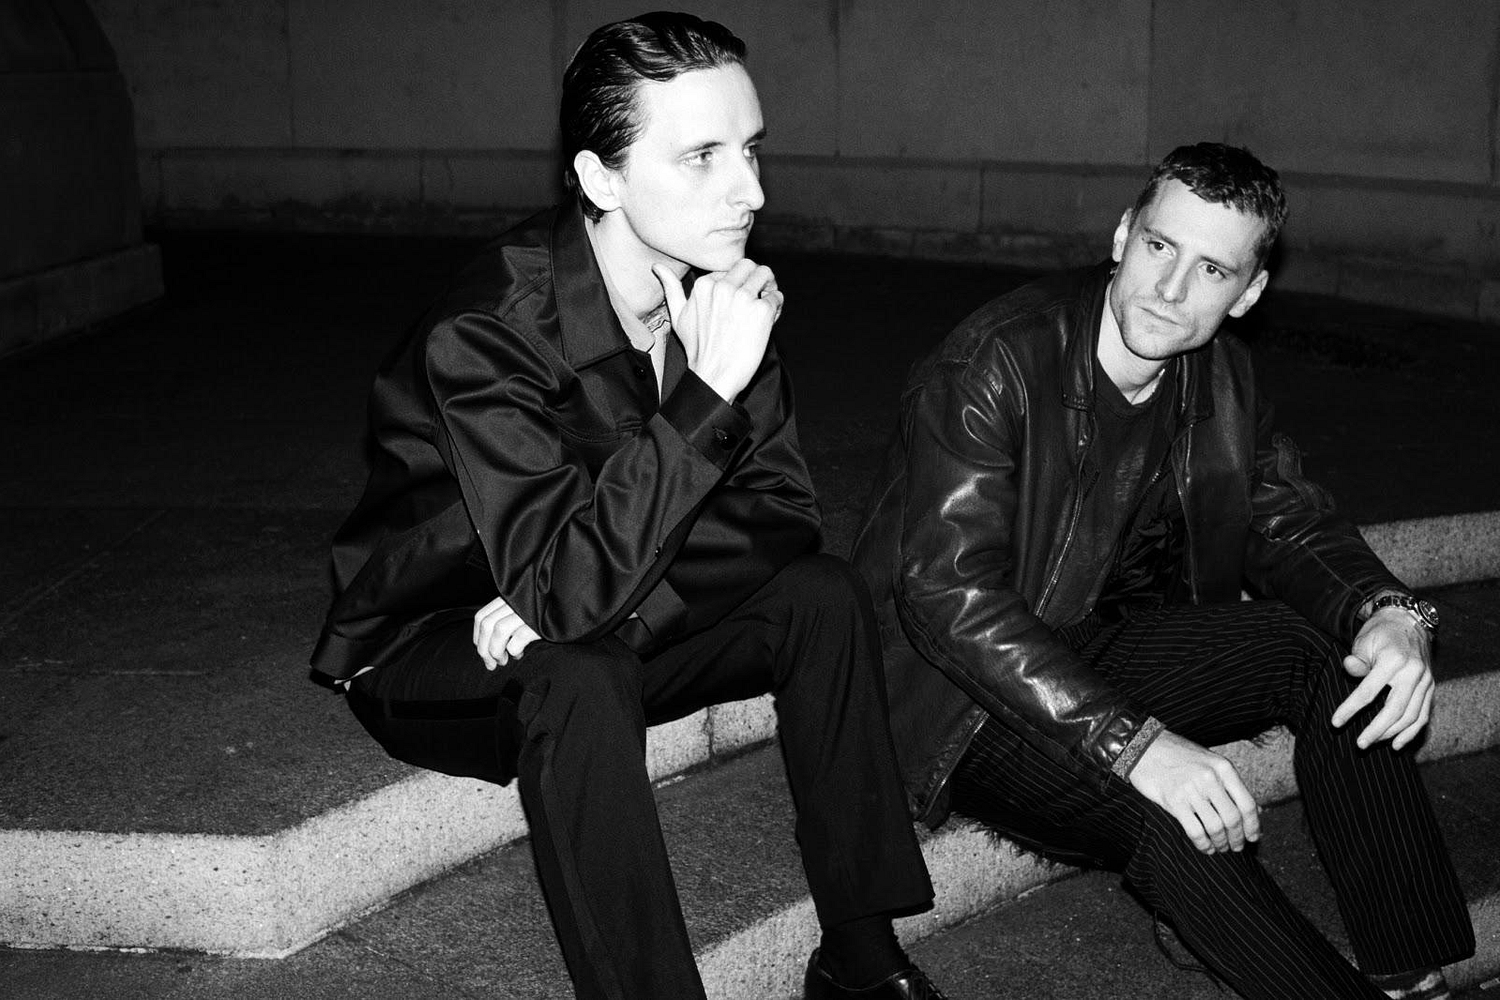 These New Puritans share ‘Beyond Black Suns’ video